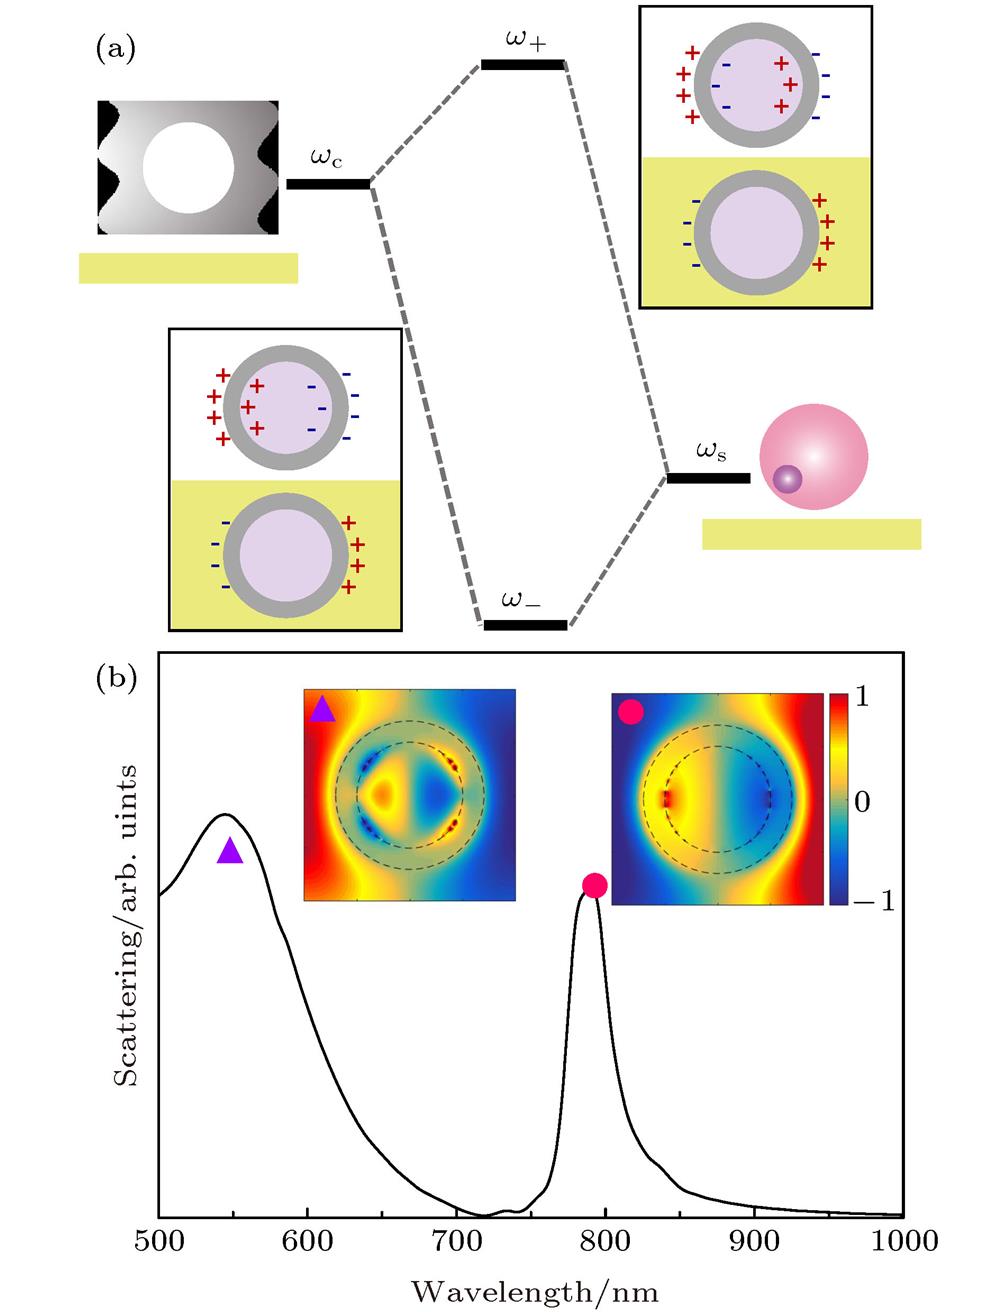 (a) Scheme of plasmon hybridization picture of the core-shell on gold film; (b) scattering spectrum of core-shell particles on gold film. The inset of panel (b) shows the z-component of the electric field in xy plane.